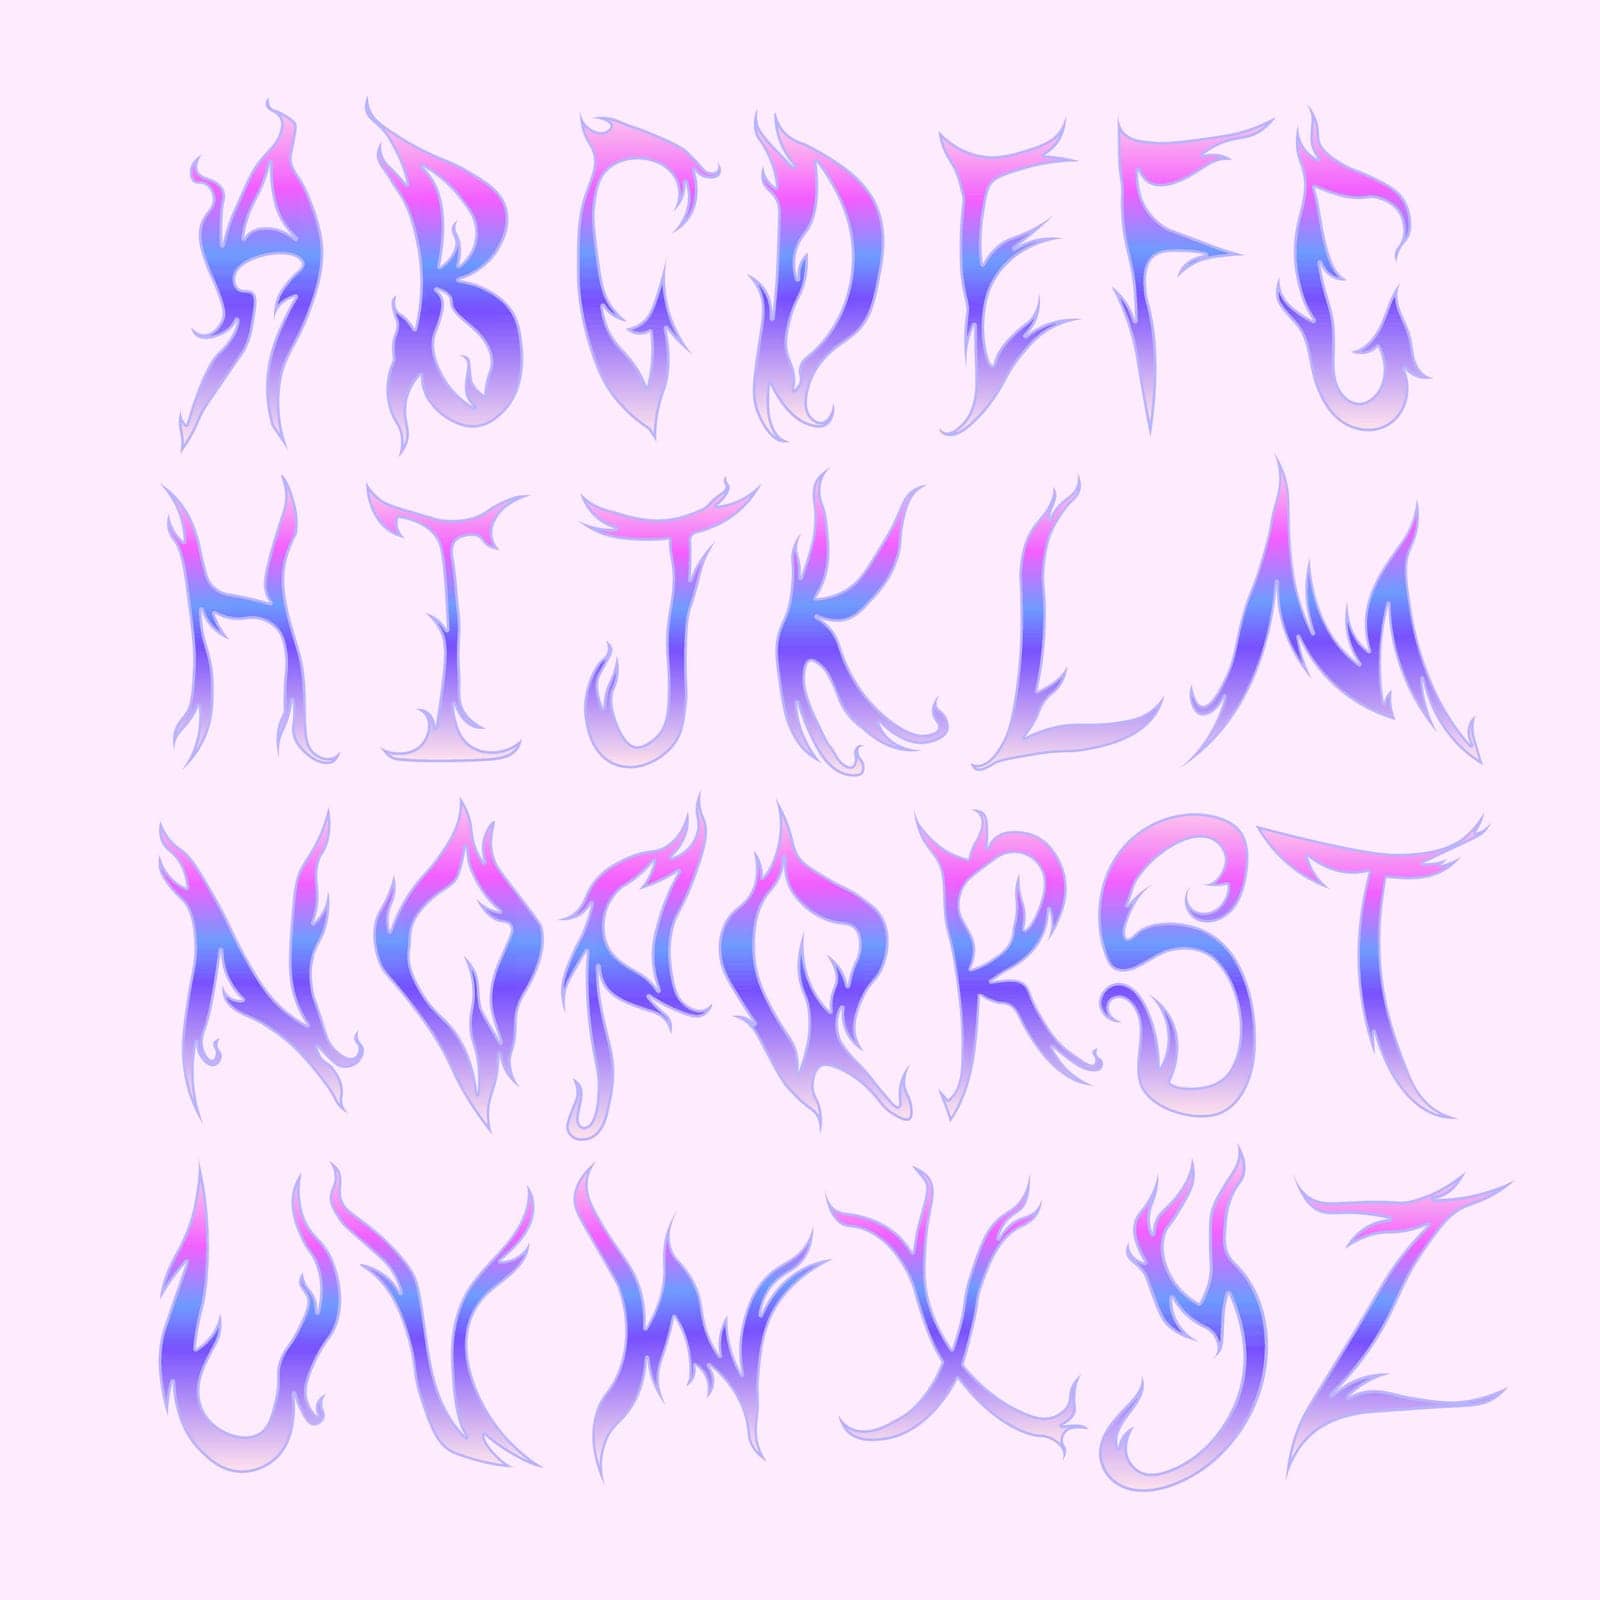 Y2k fire holographic font. Flame holo alphabet vector set Liqud glamour gradient colors 2000s style. Vecto 90s, 00s aesthetic trendy emo goth EPS by Alxyzt